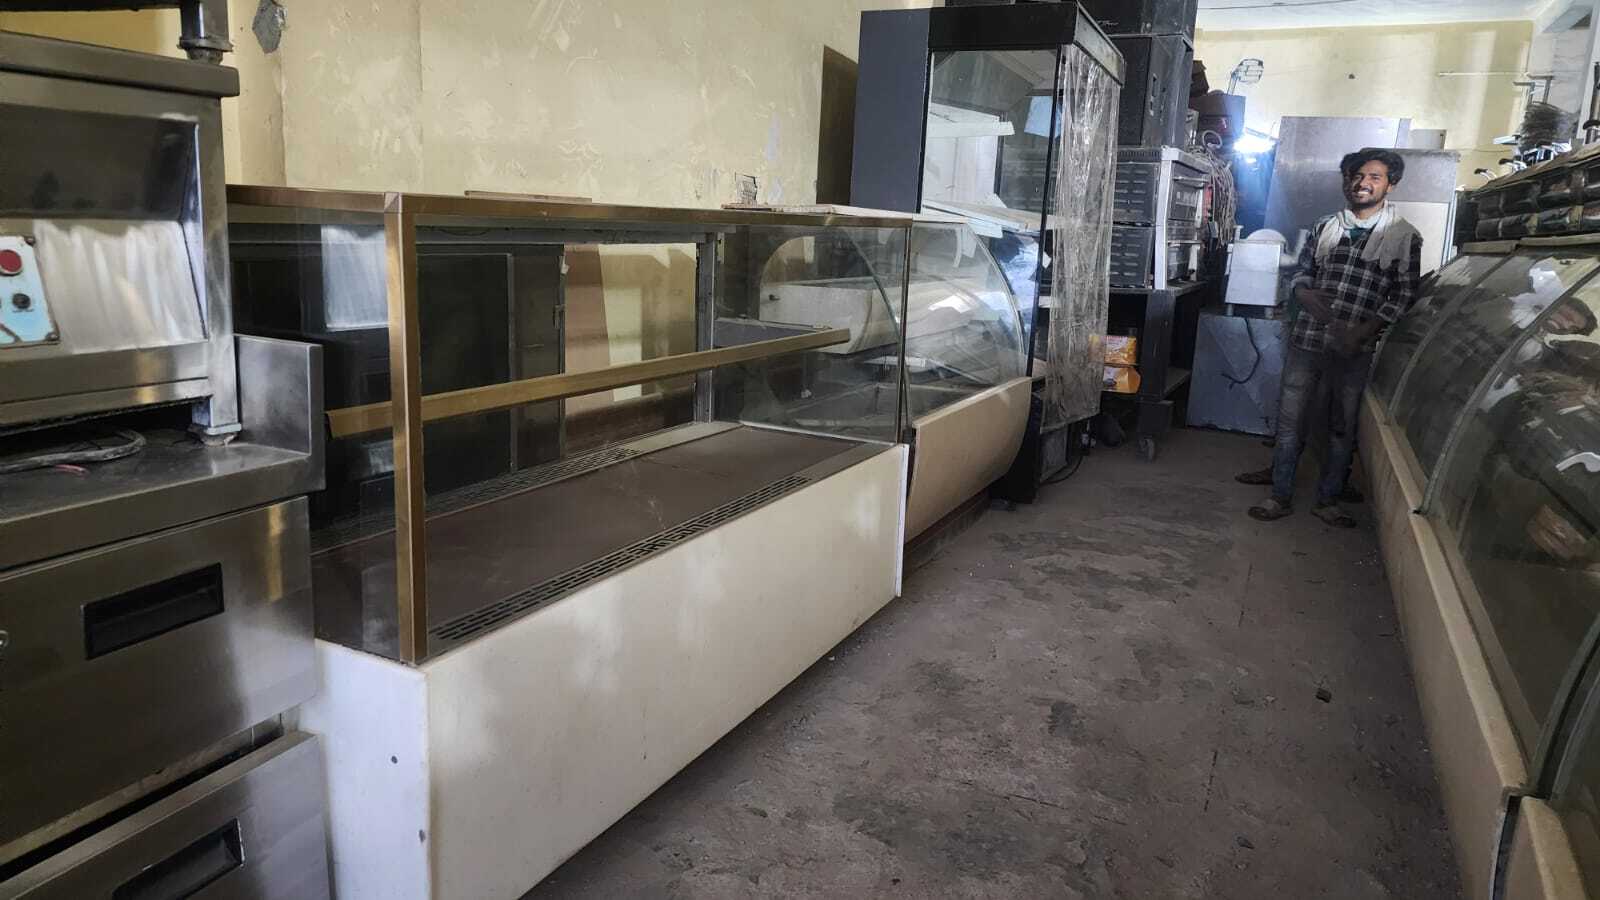 Old Stainless Steel Display Counter